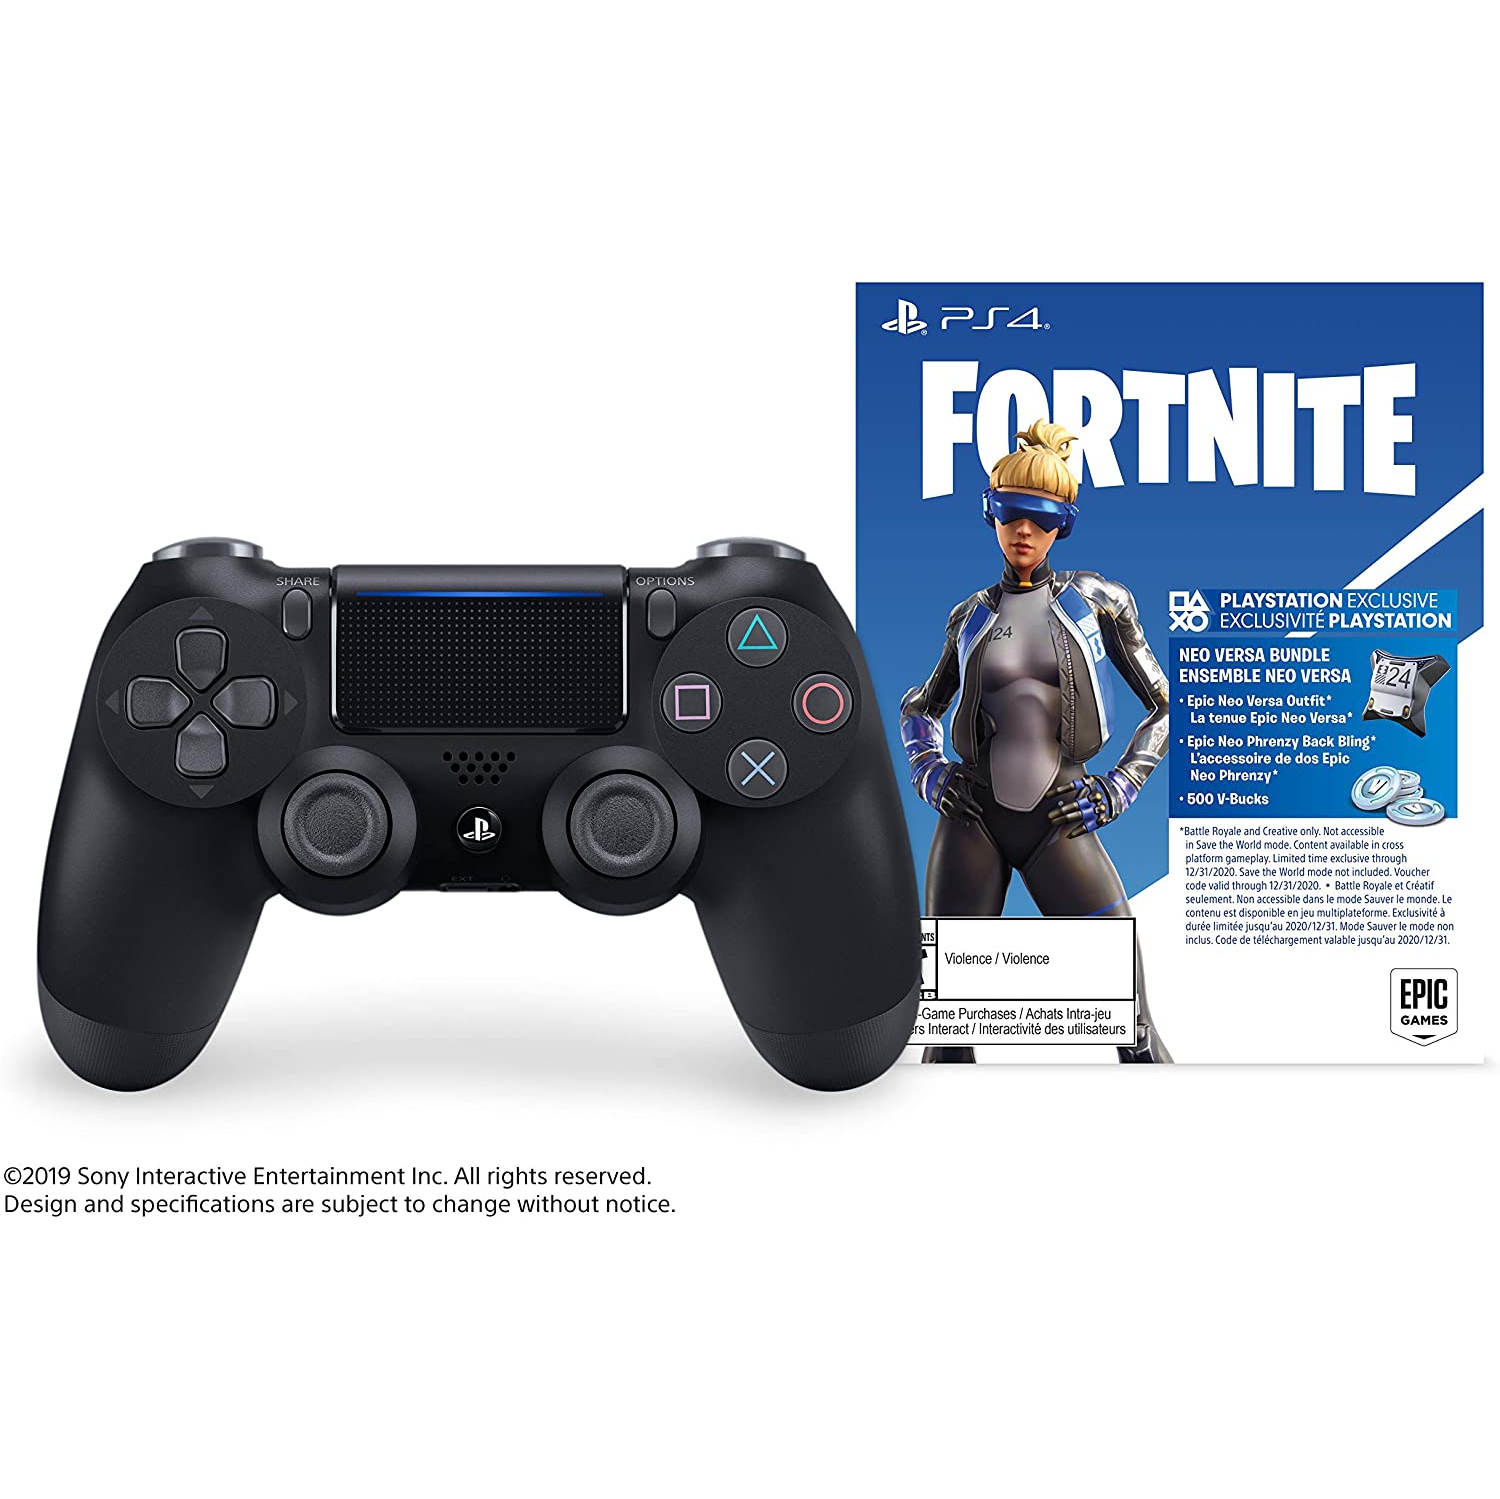 Open Box - PS4 DualShock 4 Wireless Controller - Jet Black with Fortnite DLC Pack